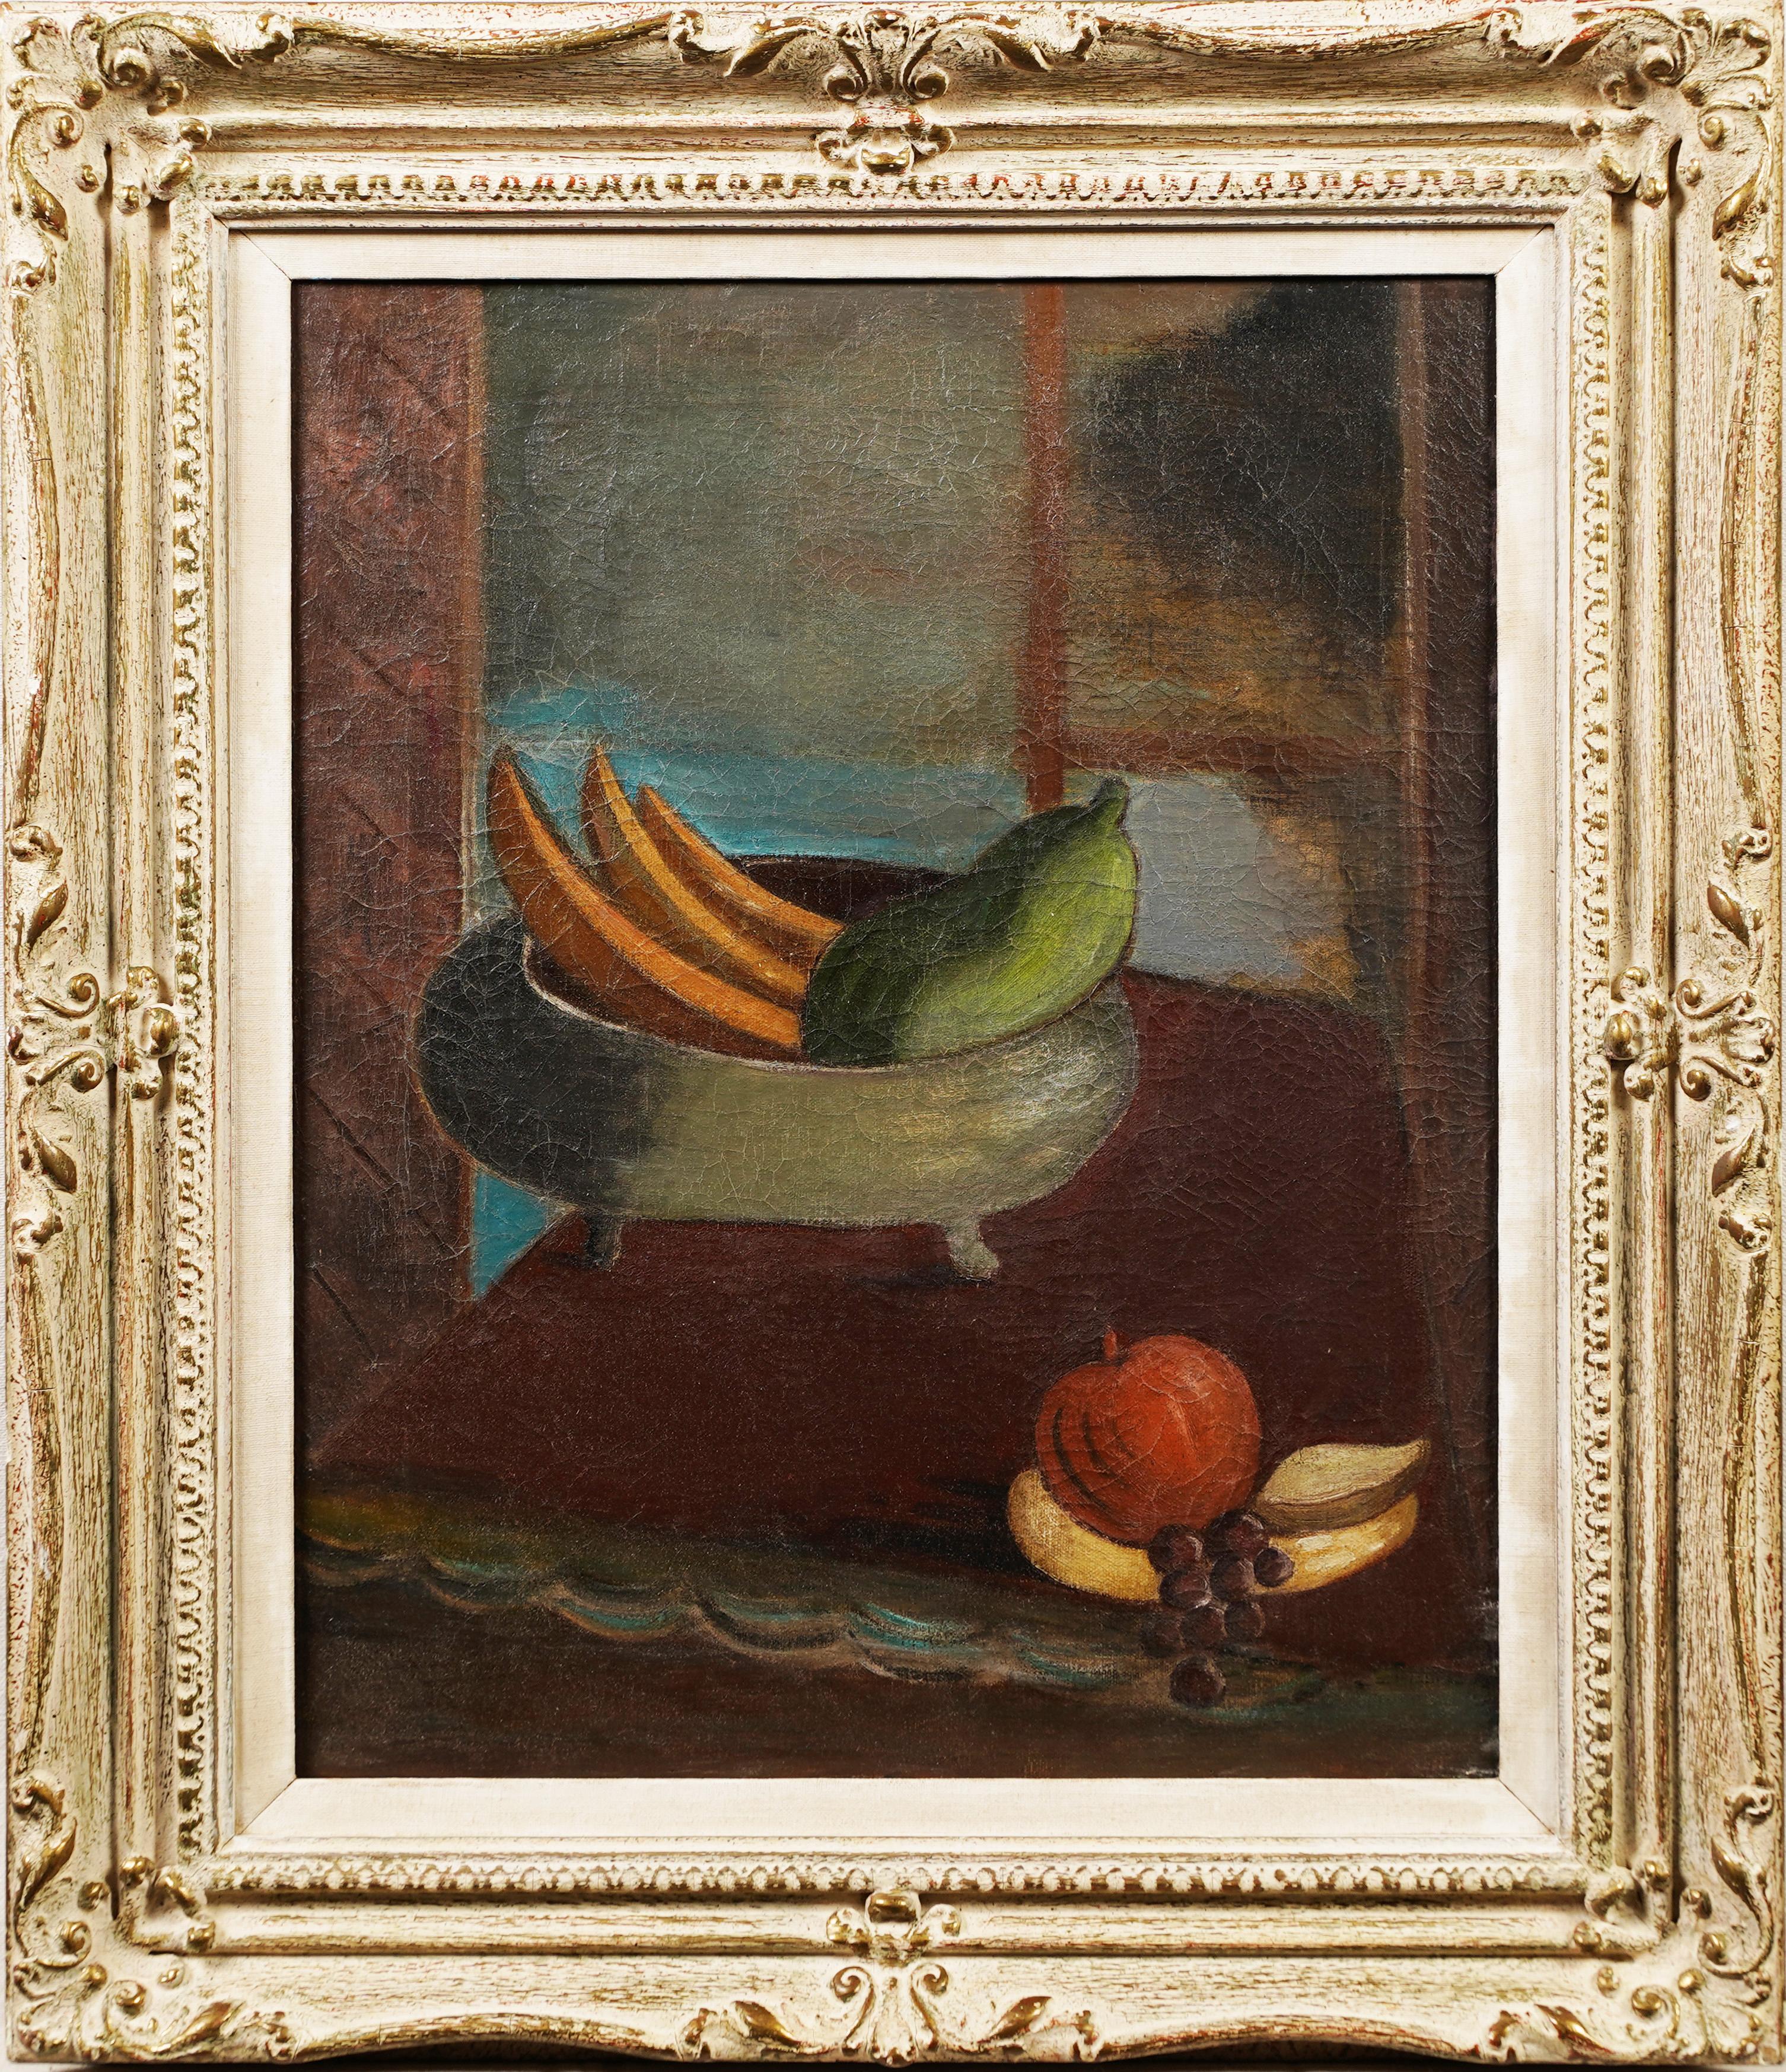 Unknown Interior Painting -  Antique American School Framed Modern Kitchen Still Life Fruit Oil Painting